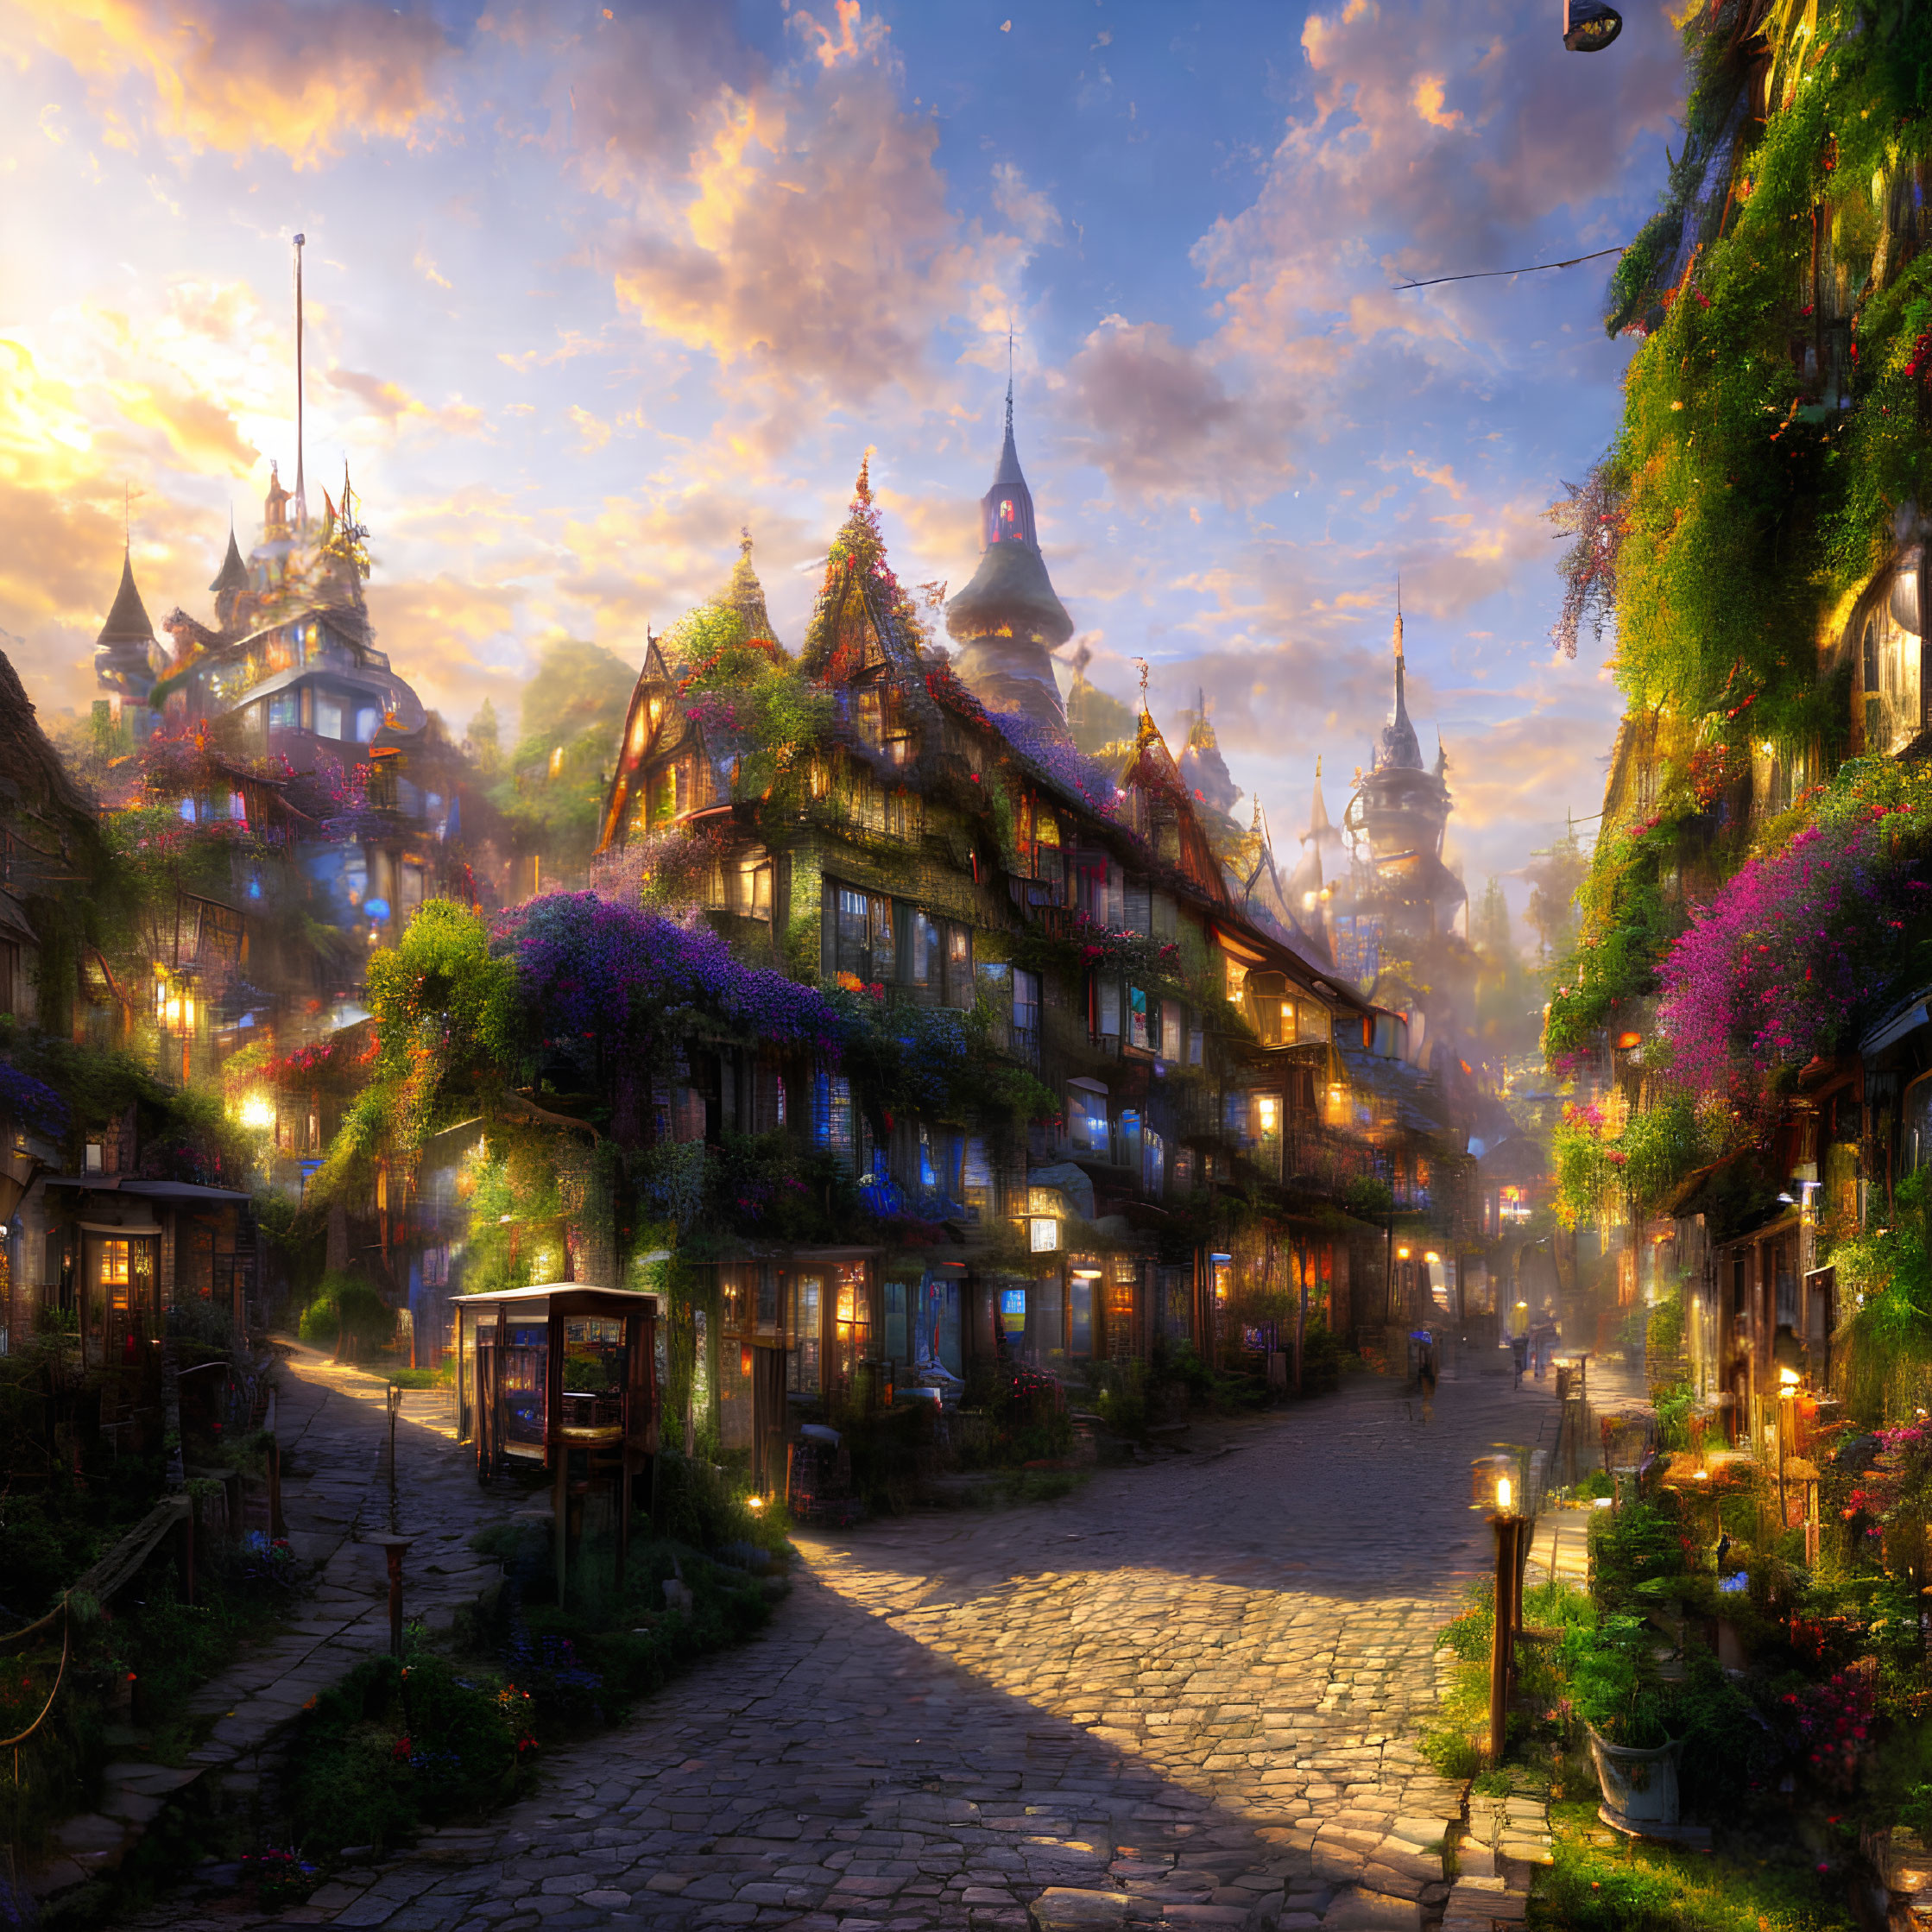 Charming cobblestone street with colorful houses and castle at sunset